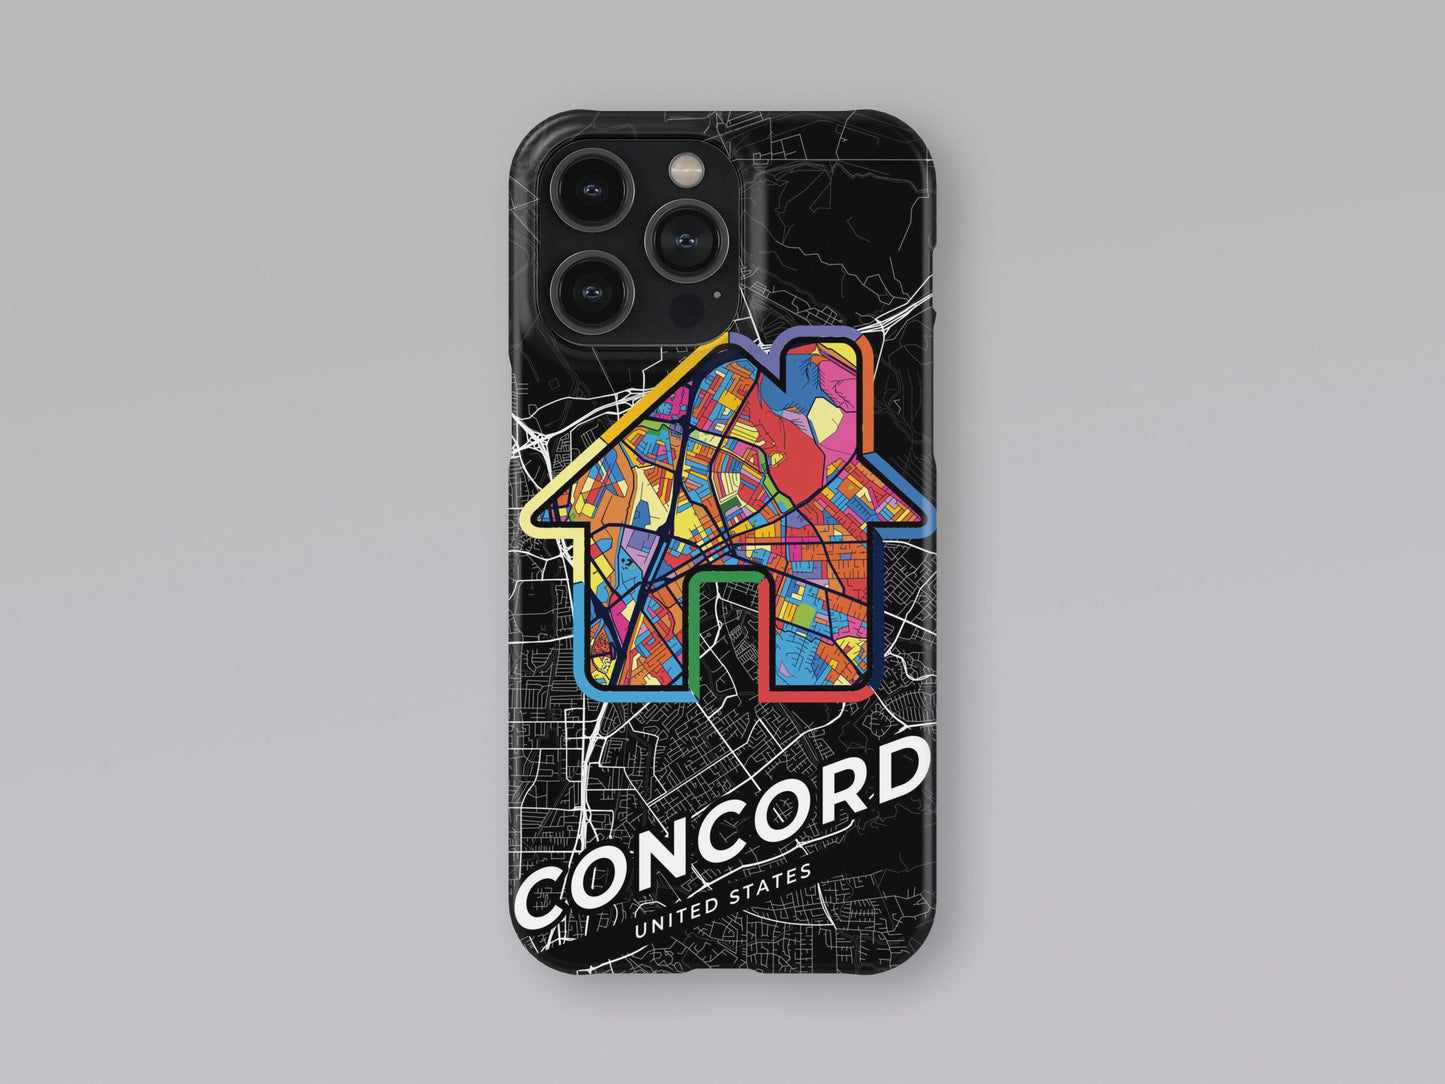 Concord California slim phone case with colorful icon. Birthday, wedding or housewarming gift. Couple match cases. 3